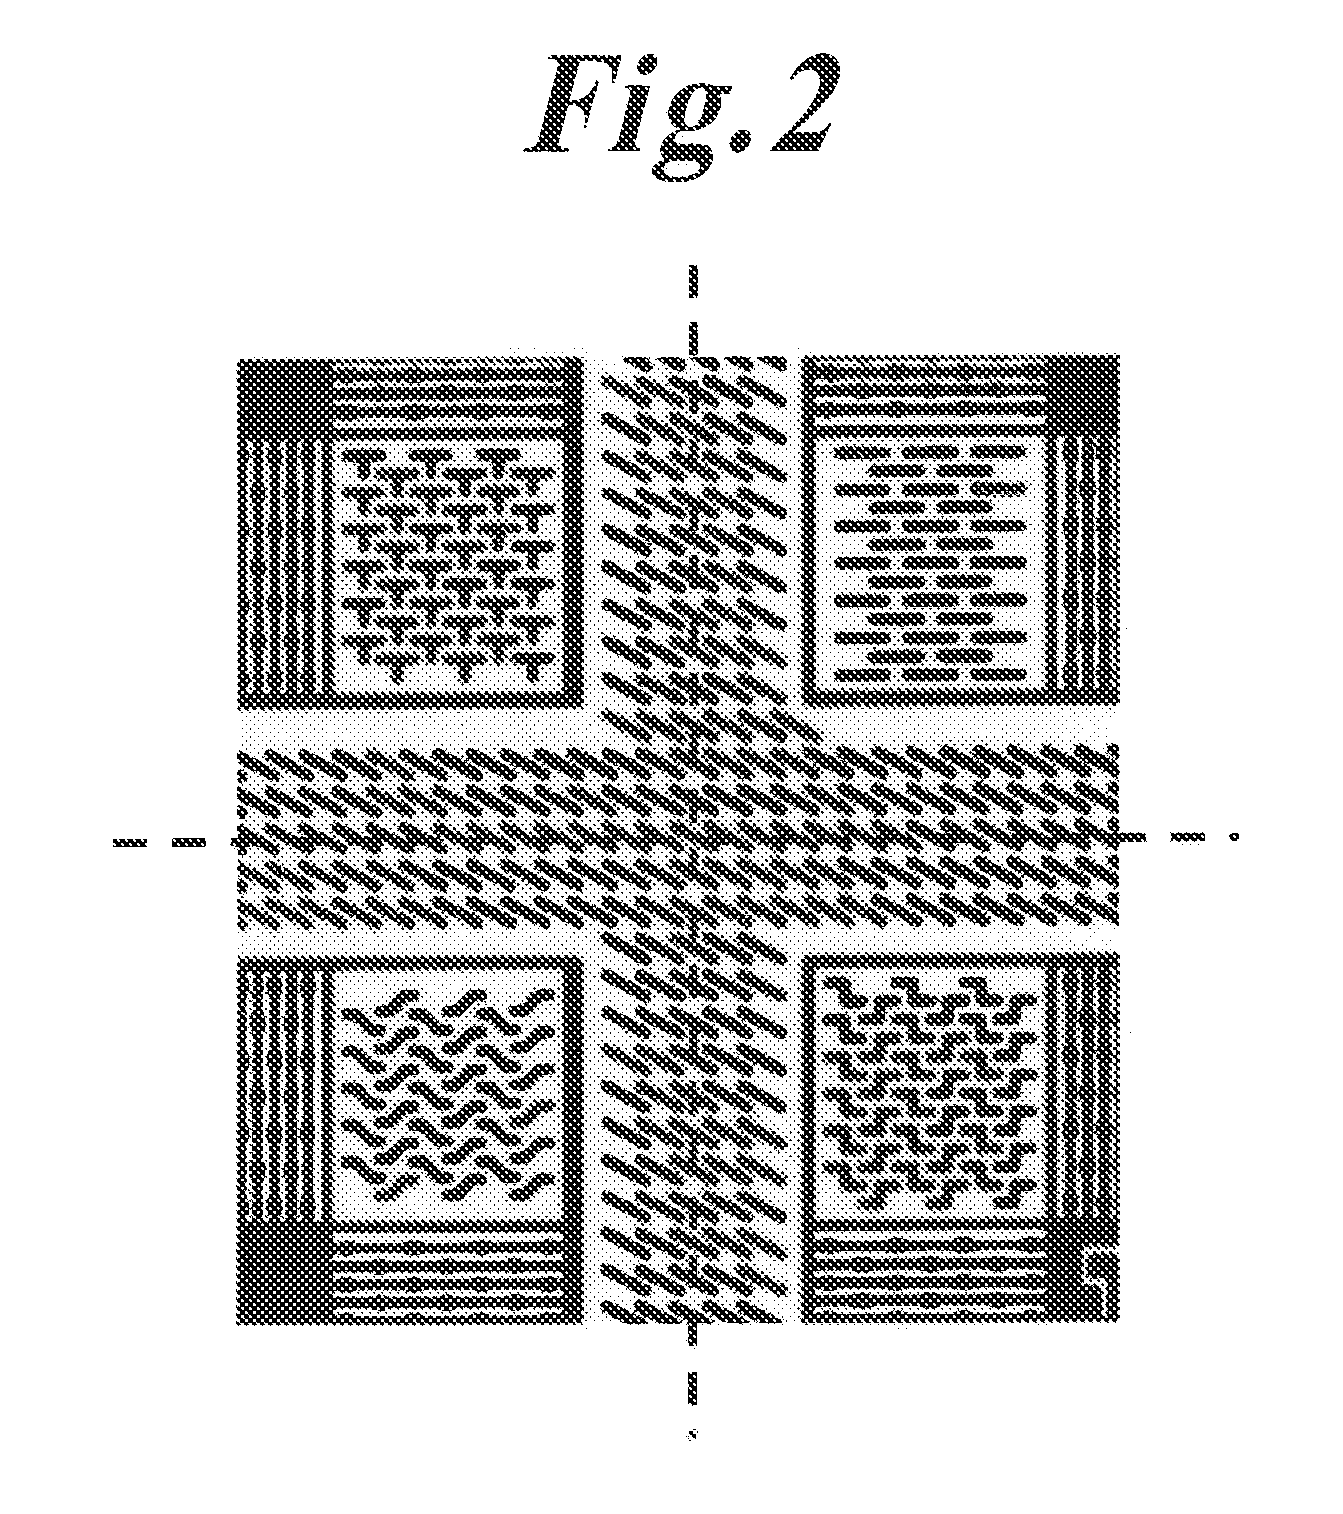 Image density-adapted automatic mode switchable pattern correction scheme for workpiece inspection